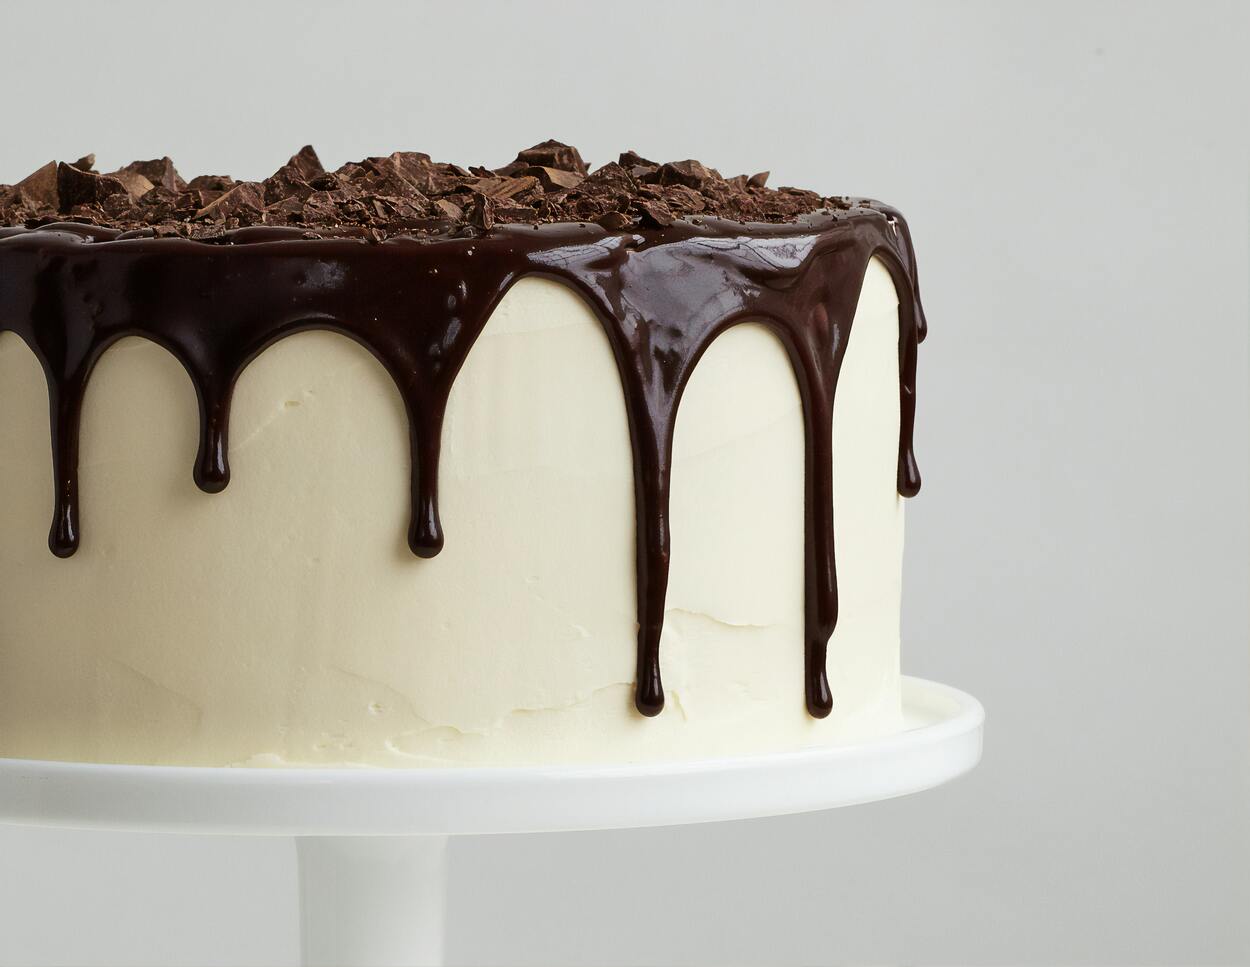 Vanilla cake with chocolate frosting. 